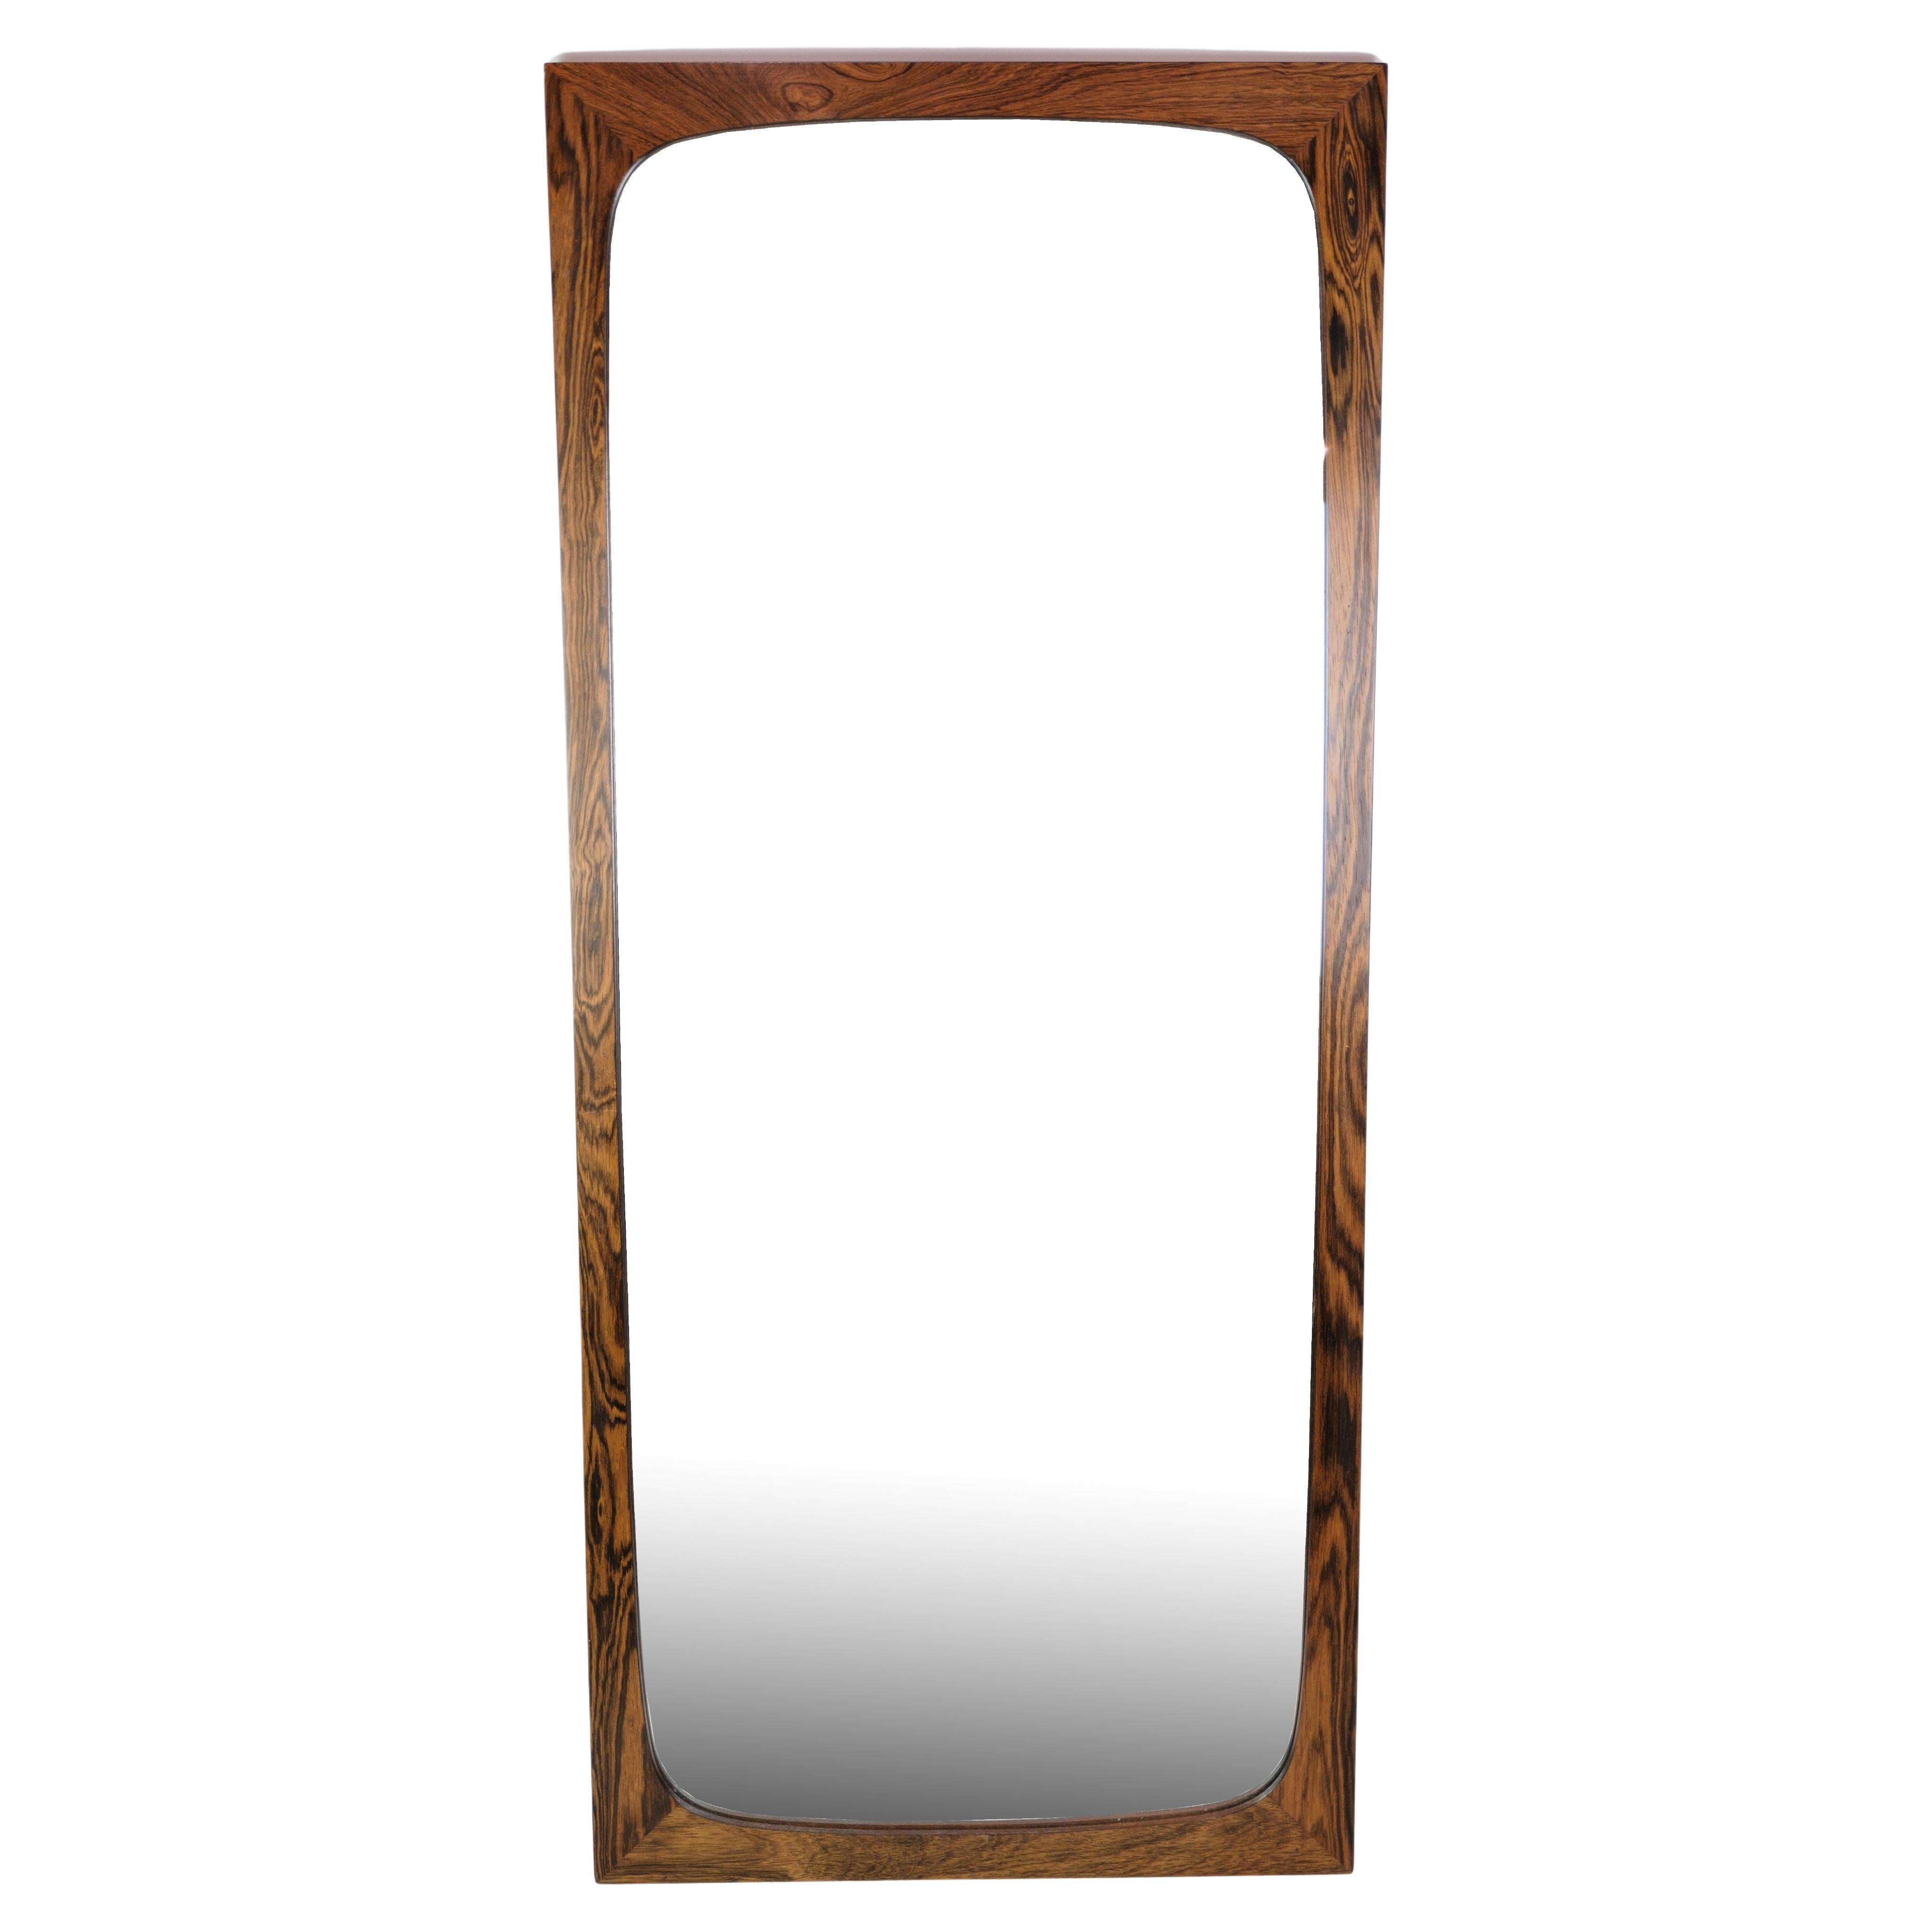 Mirror Made In Rosewood, Danish Design From 1960s